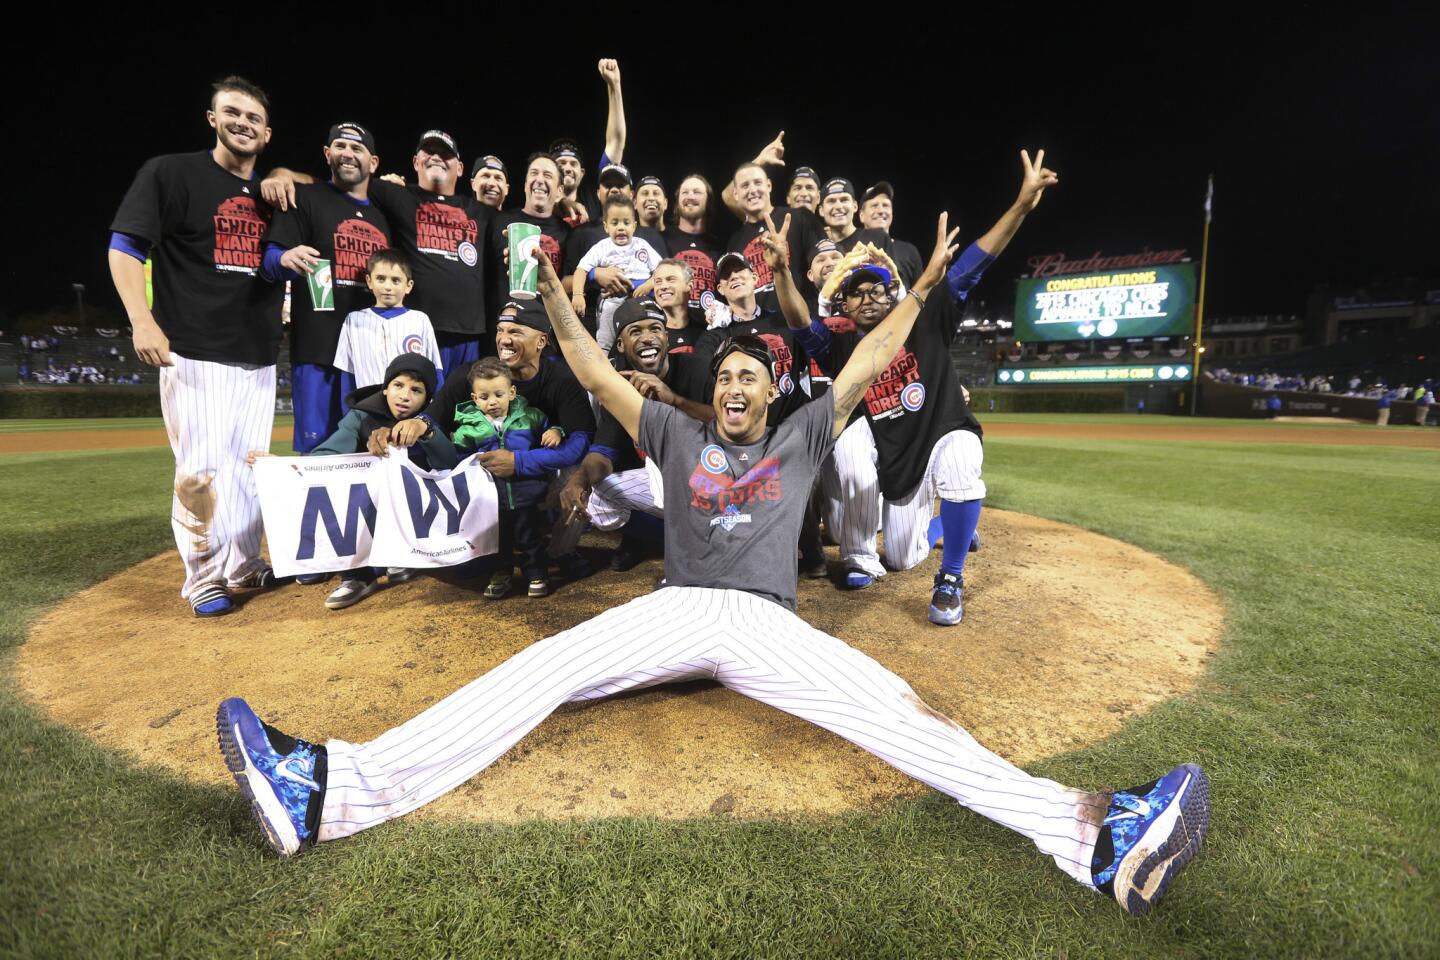 The Cubs pose on the mound after their Game 4 win.